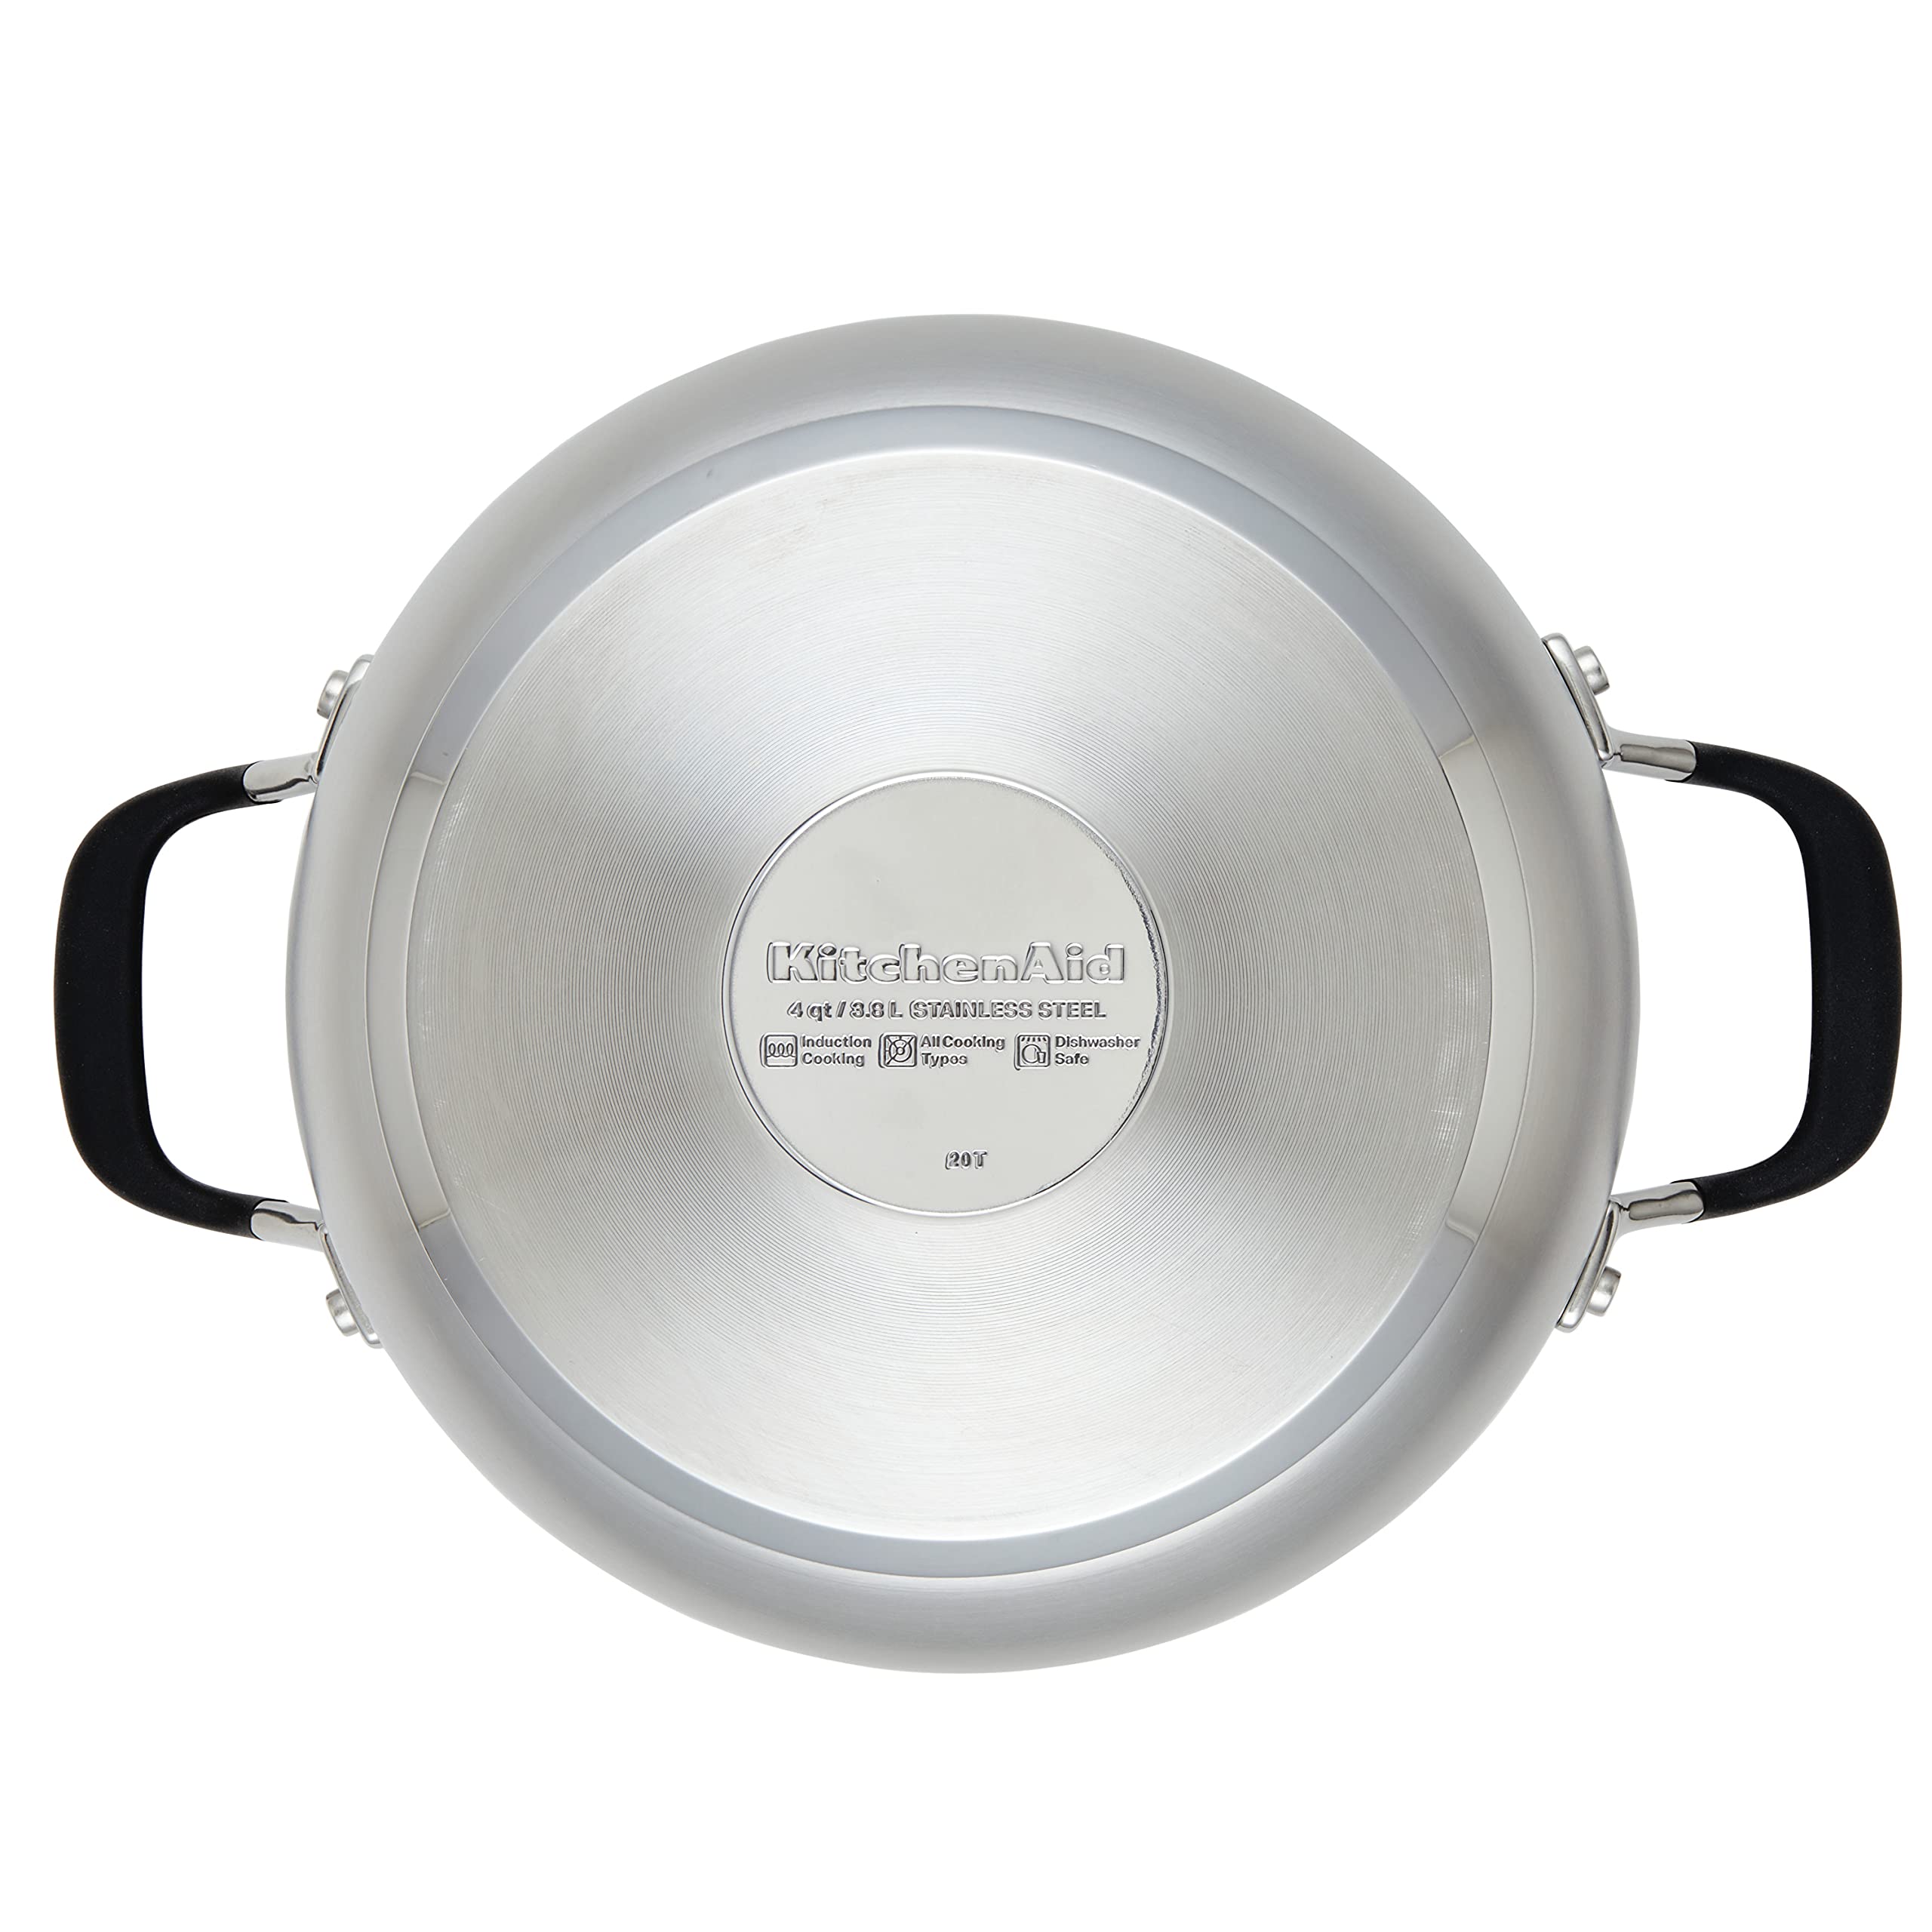 KitchenAid Casserole with Lid, 4 Quart, Brushed Stainless Steel